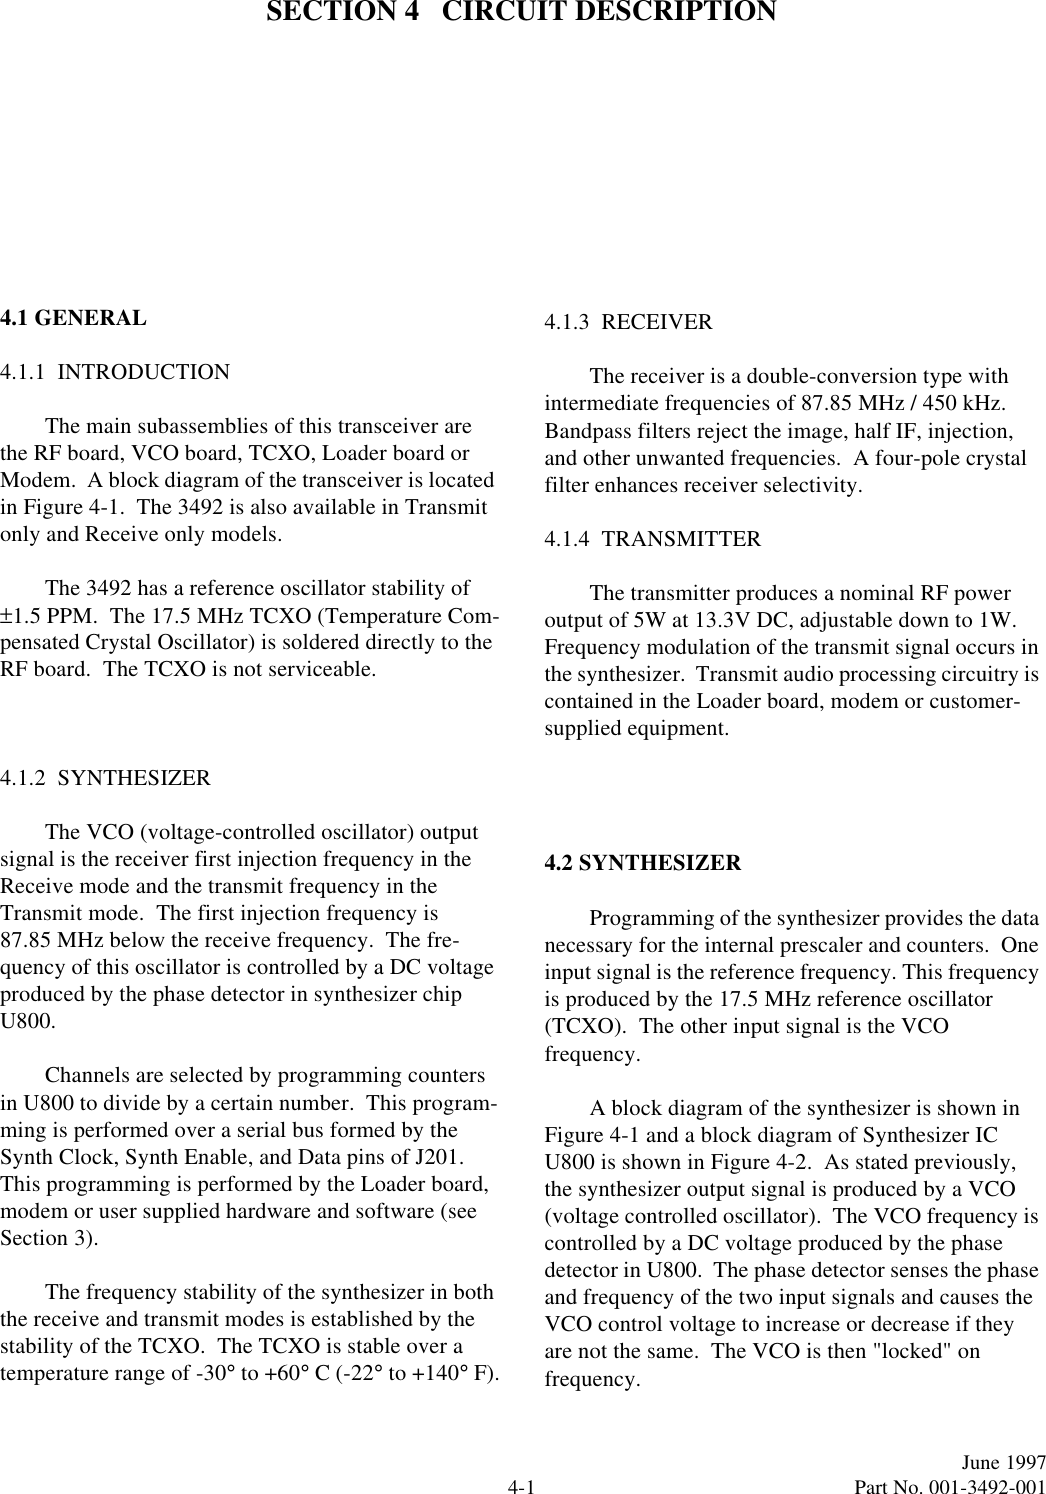 4-1June 1997  Part No. 001-3492-001SECTION 4   CIRCUIT DESCRIPTION4.1 GENERAL4.1.1  INTRODUCTIONThe main subassemblies of this transceiver are the RF board, VCO board, TCXO, Loader board or Modem.  A block diagram of the transceiver is located in Figure 4-1.  The 3492 is also available in Transmit only and Receive only models.The 3492 has a reference oscillator stability of ±1.5 PPM.  The 17.5 MHz TCXO (Temperature Com-pensated Crystal Oscillator) is soldered directly to the RF board.  The TCXO is not serviceable.4.1.2  SYNTHESIZERThe VCO (voltage-controlled oscillator) output signal is the receiver first injection frequency in the Receive mode and the transmit frequency in the Transmit mode.  The first injection frequency is 87.85 MHz below the receive frequency.  The fre-quency of this oscillator is controlled by a DC voltage produced by the phase detector in synthesizer chip U800.Channels are selected by programming counters in U800 to divide by a certain number.  This program-ming is performed over a serial bus formed by the Synth Clock, Synth Enable, and Data pins of J201.  This programming is performed by the Loader board, modem or user supplied hardware and software (see Section 3).The frequency stability of the synthesizer in both the receive and transmit modes is established by the stability of the TCXO.  The TCXO is stable over a temperature range of -30° to +60° C (-22° to +140° F).4.1.3  RECEIVERThe receiver is a double-conversion type with intermediate frequencies of 87.85 MHz / 450 kHz.  Bandpass filters reject the image, half IF, injection, and other unwanted frequencies.  A four-pole crystal filter enhances receiver selectivity.4.1.4  TRANSMITTERThe transmitter produces a nominal RF power output of 5W at 13.3V DC, adjustable down to 1W. Frequency modulation of the transmit signal occurs in the synthesizer.  Transmit audio processing circuitry is contained in the Loader board, modem or customer-supplied equipment.4.2 SYNTHESIZERProgramming of the synthesizer provides the data necessary for the internal prescaler and counters.  One input signal is the reference frequency. This frequency is produced by the 17.5 MHz reference oscillator (TCXO).  The other input signal is the VCO frequency.A block diagram of the synthesizer is shown in Figure 4-1 and a block diagram of Synthesizer IC U800 is shown in Figure 4-2.  As stated previously, the synthesizer output signal is produced by a VCO (voltage controlled oscillator).  The VCO frequency is controlled by a DC voltage produced by the phase detector in U800.  The phase detector senses the phase and frequency of the two input signals and causes the VCO control voltage to increase or decrease if they are not the same.  The VCO is then &quot;locked&quot; on frequency.